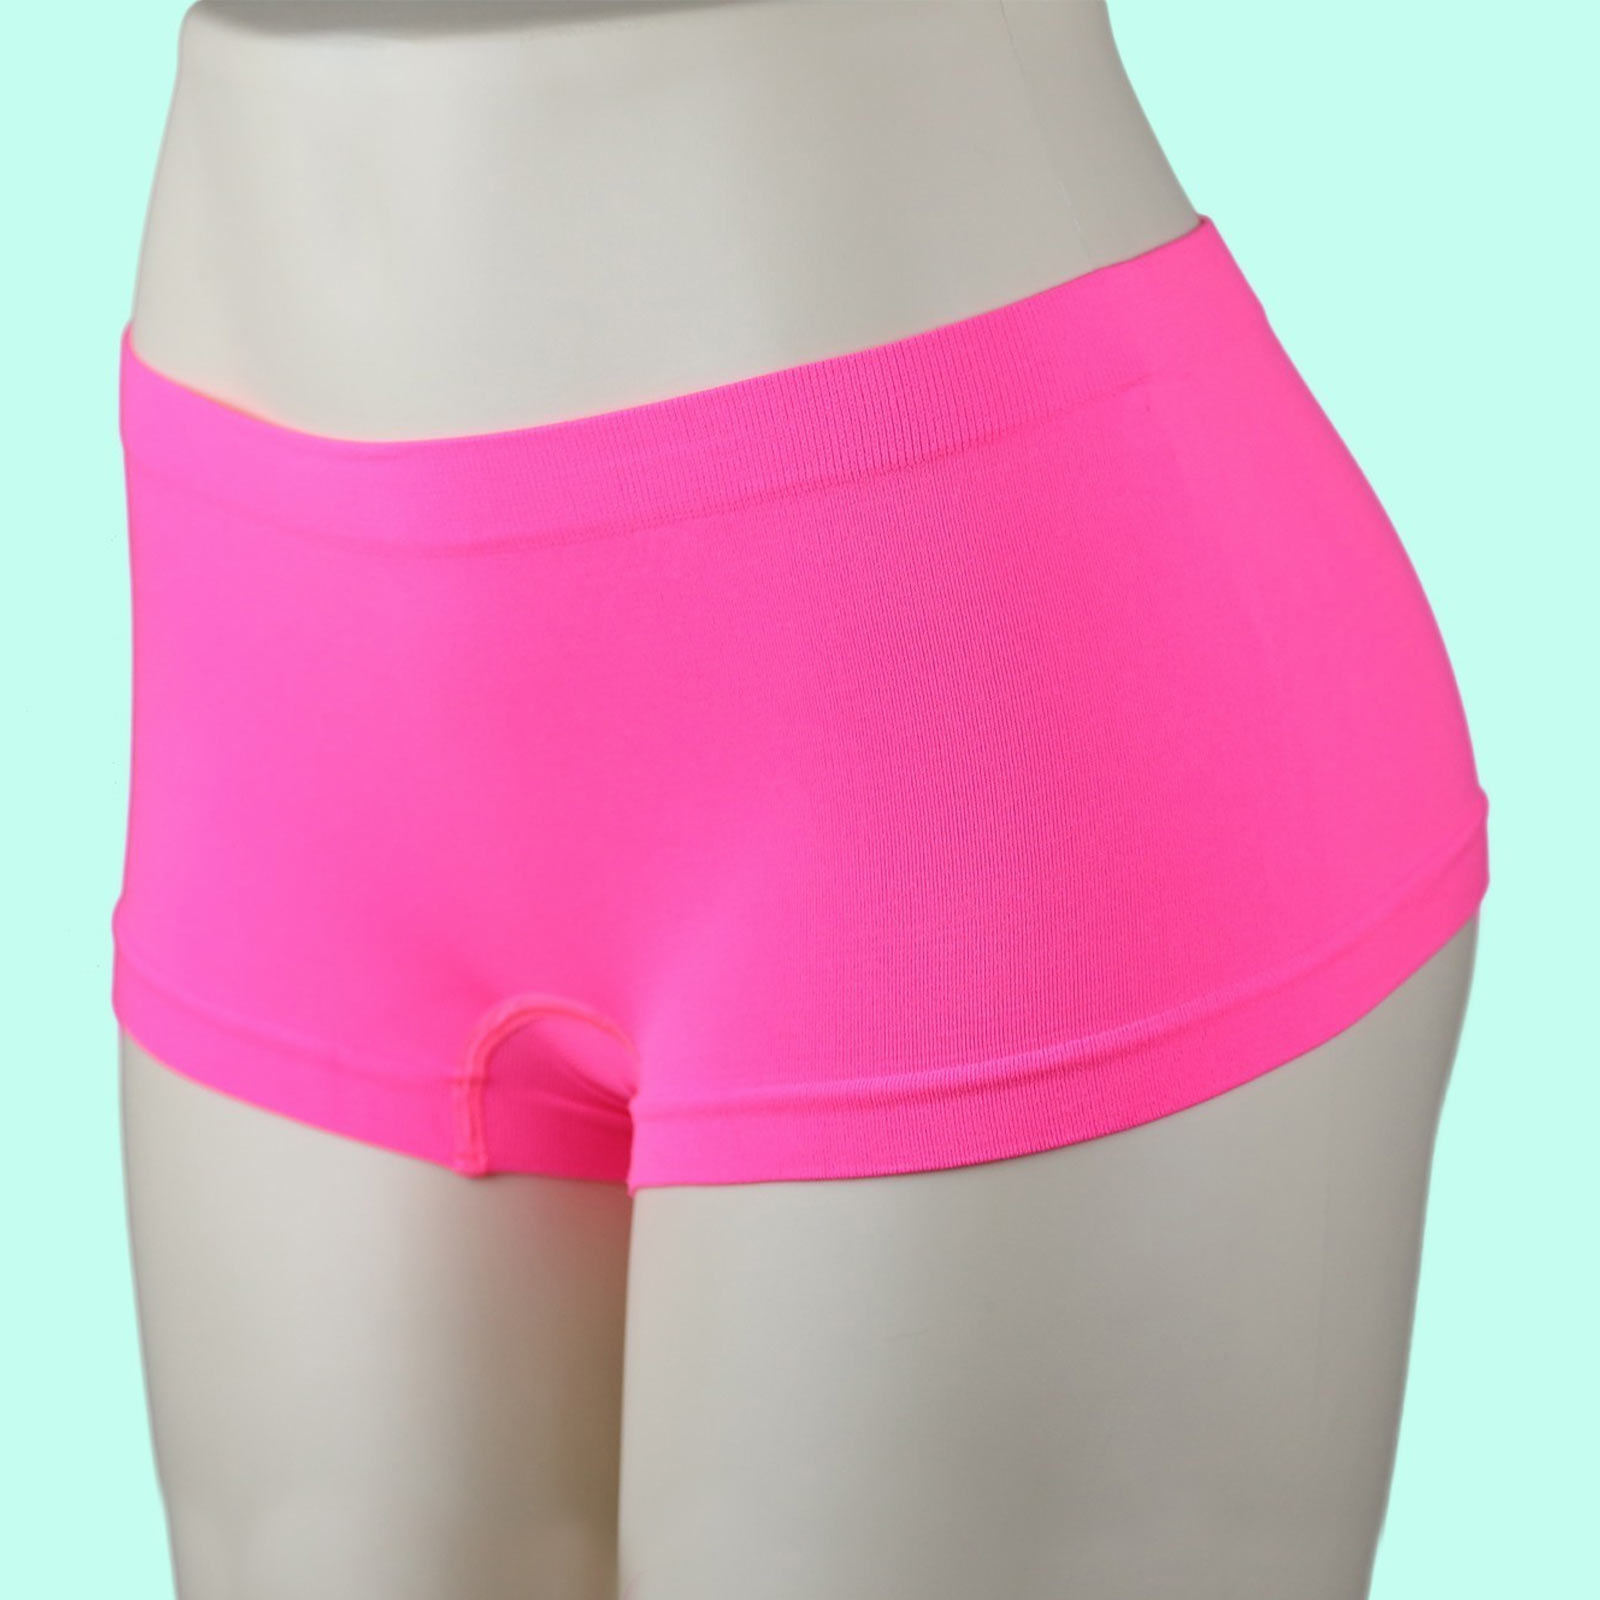 New Stretch Seamless Dance Exercise Booty Mini Panties Boy Shorts Brief ...